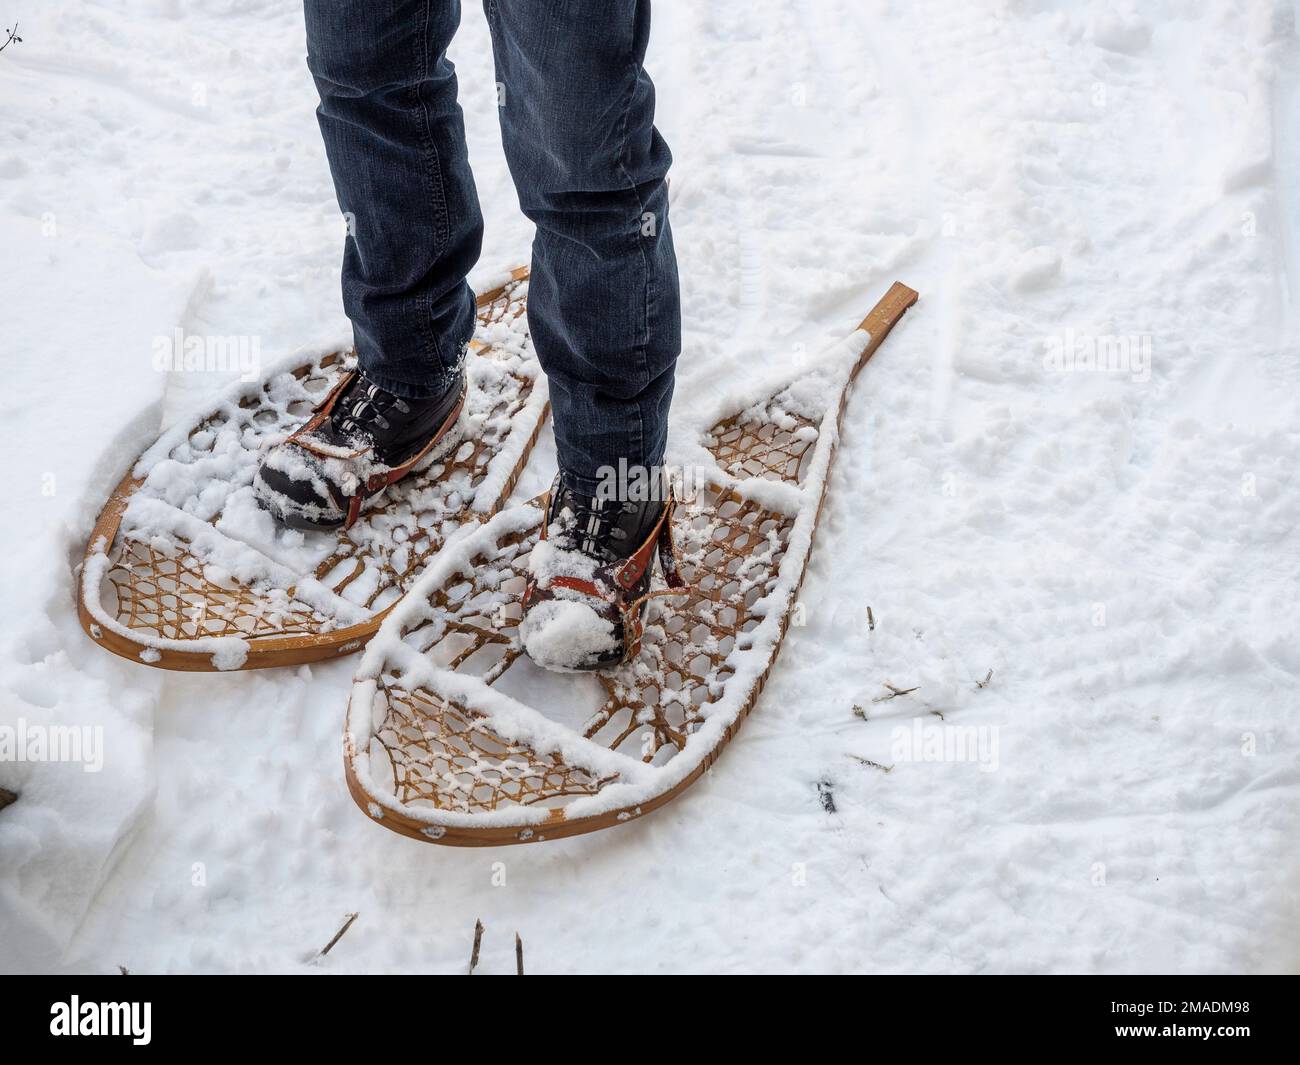 Standing on Snowshoes: A jean-clad man stands in the snow on a pair of traditional snowshoes buckeled to his boots. Stock Photo